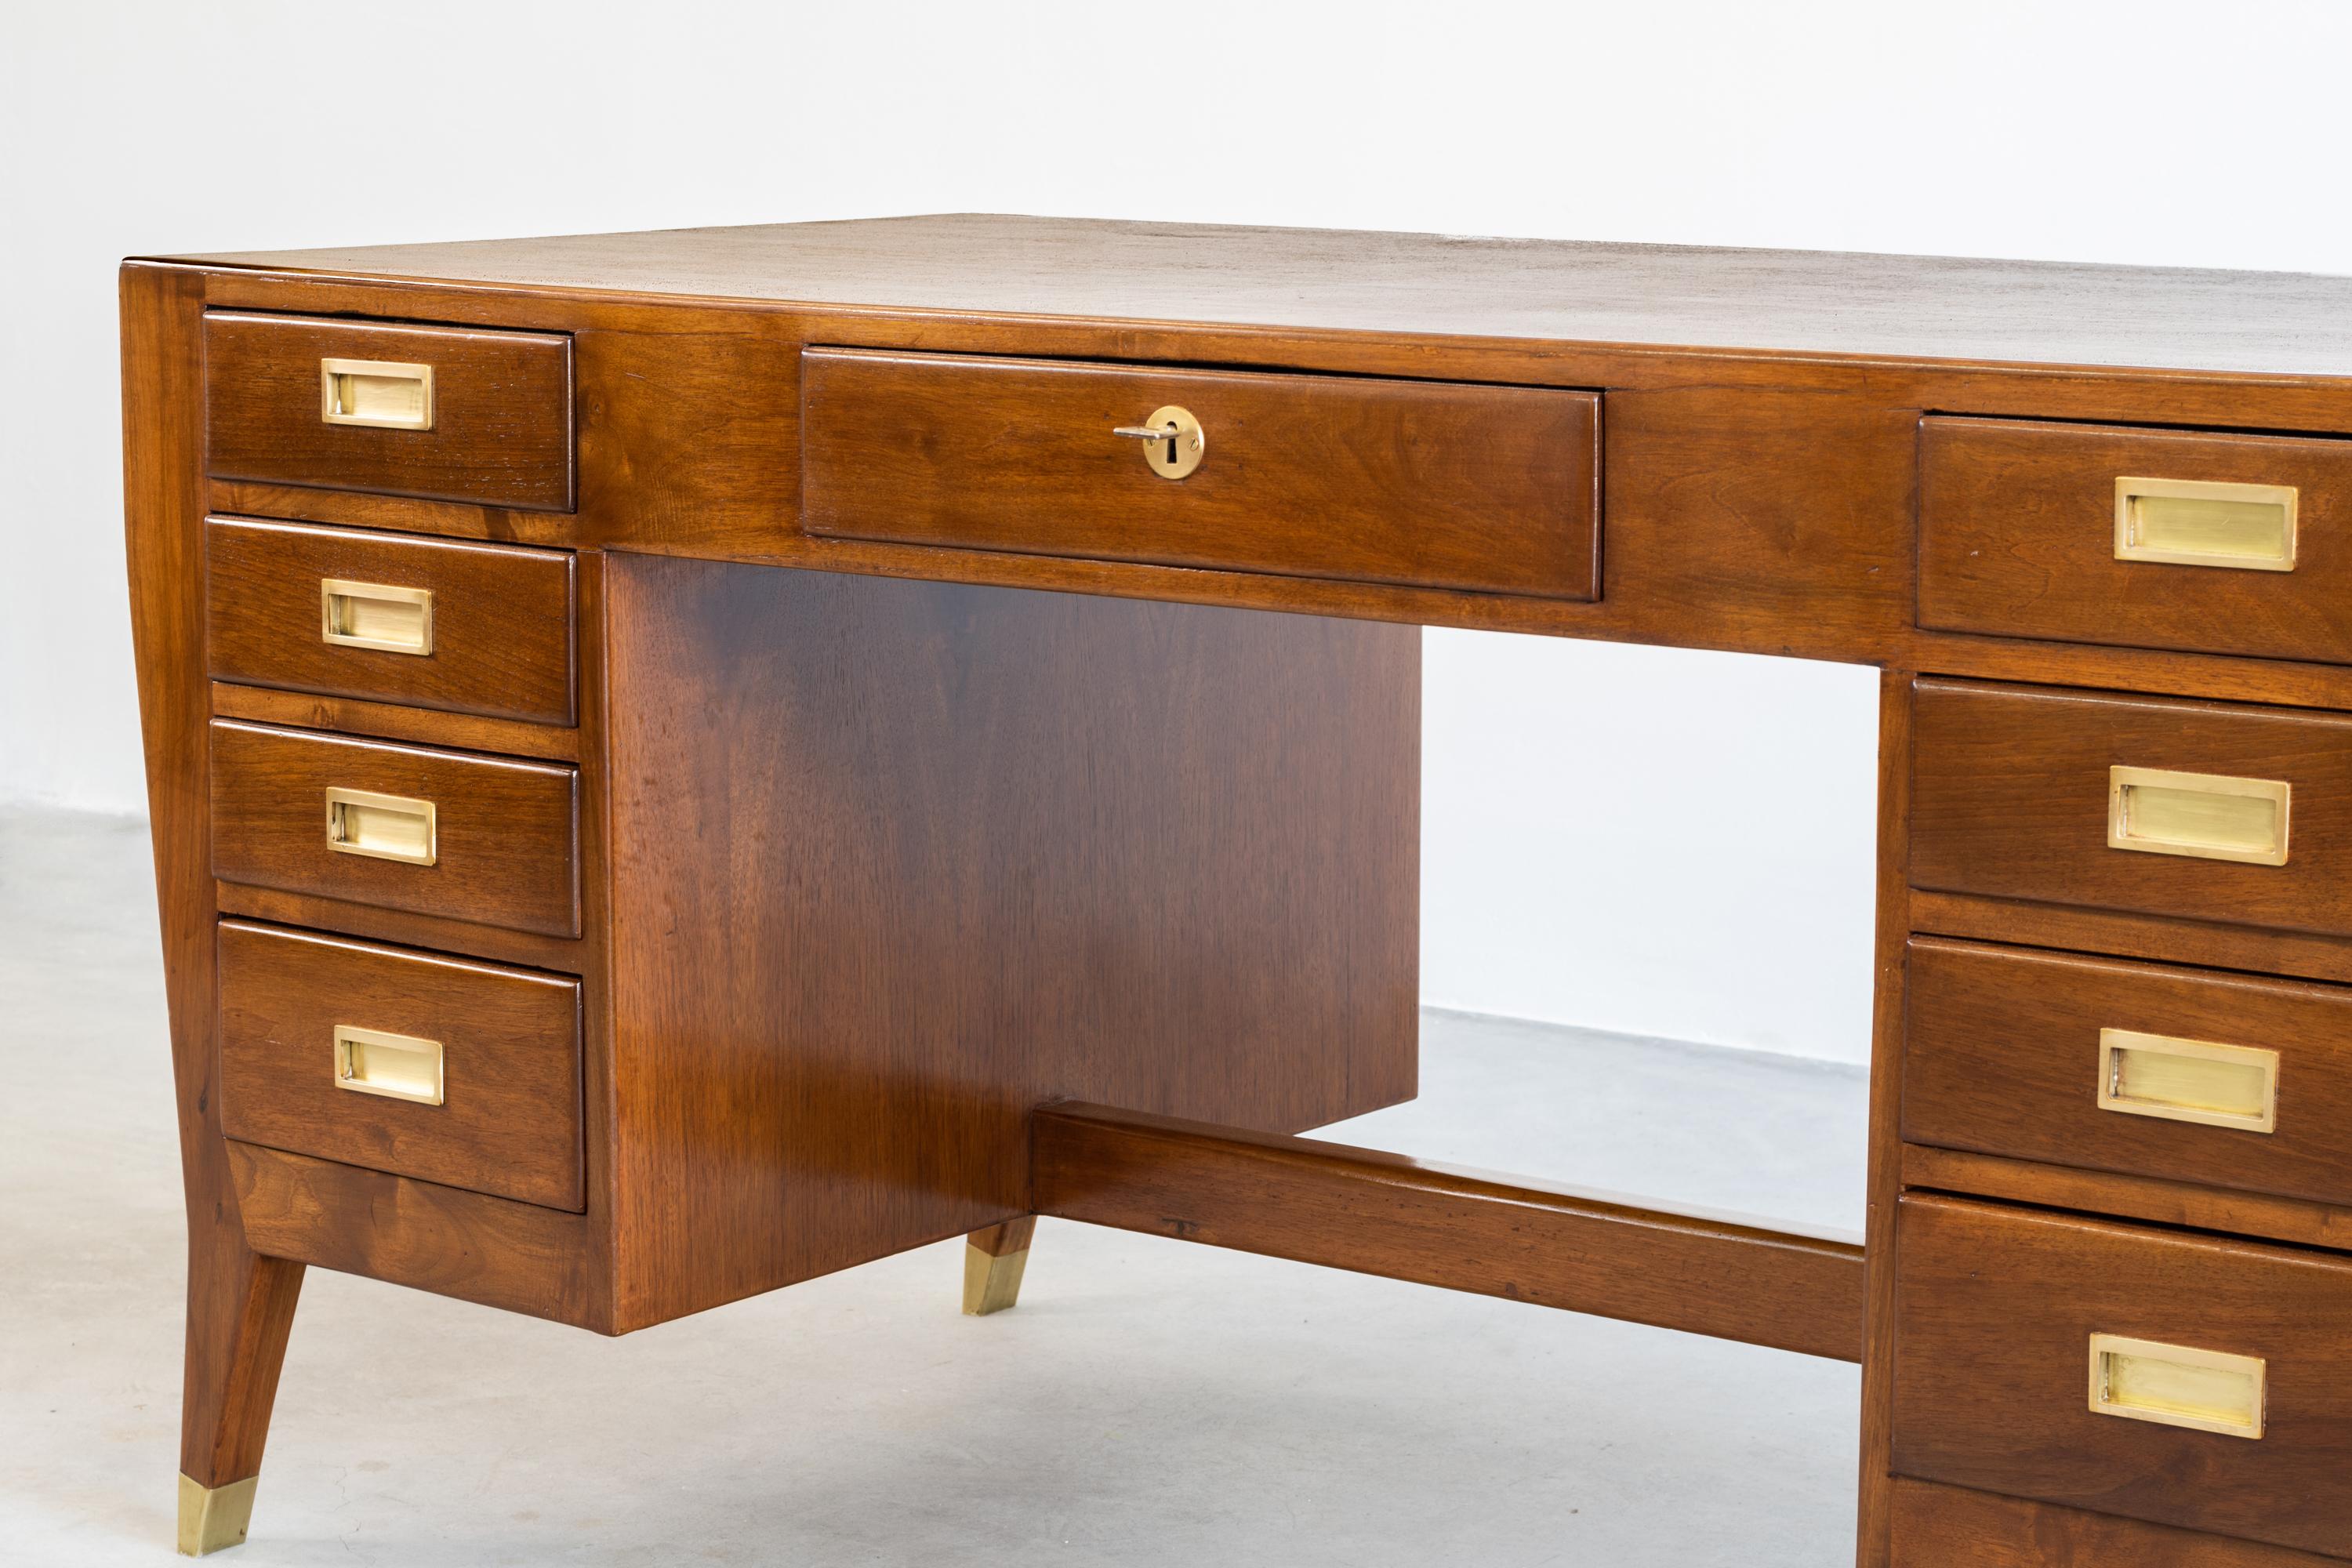 Mid-20th Century Gio Ponti Walnut and Brass Desk from 1950s Italian Manufacture